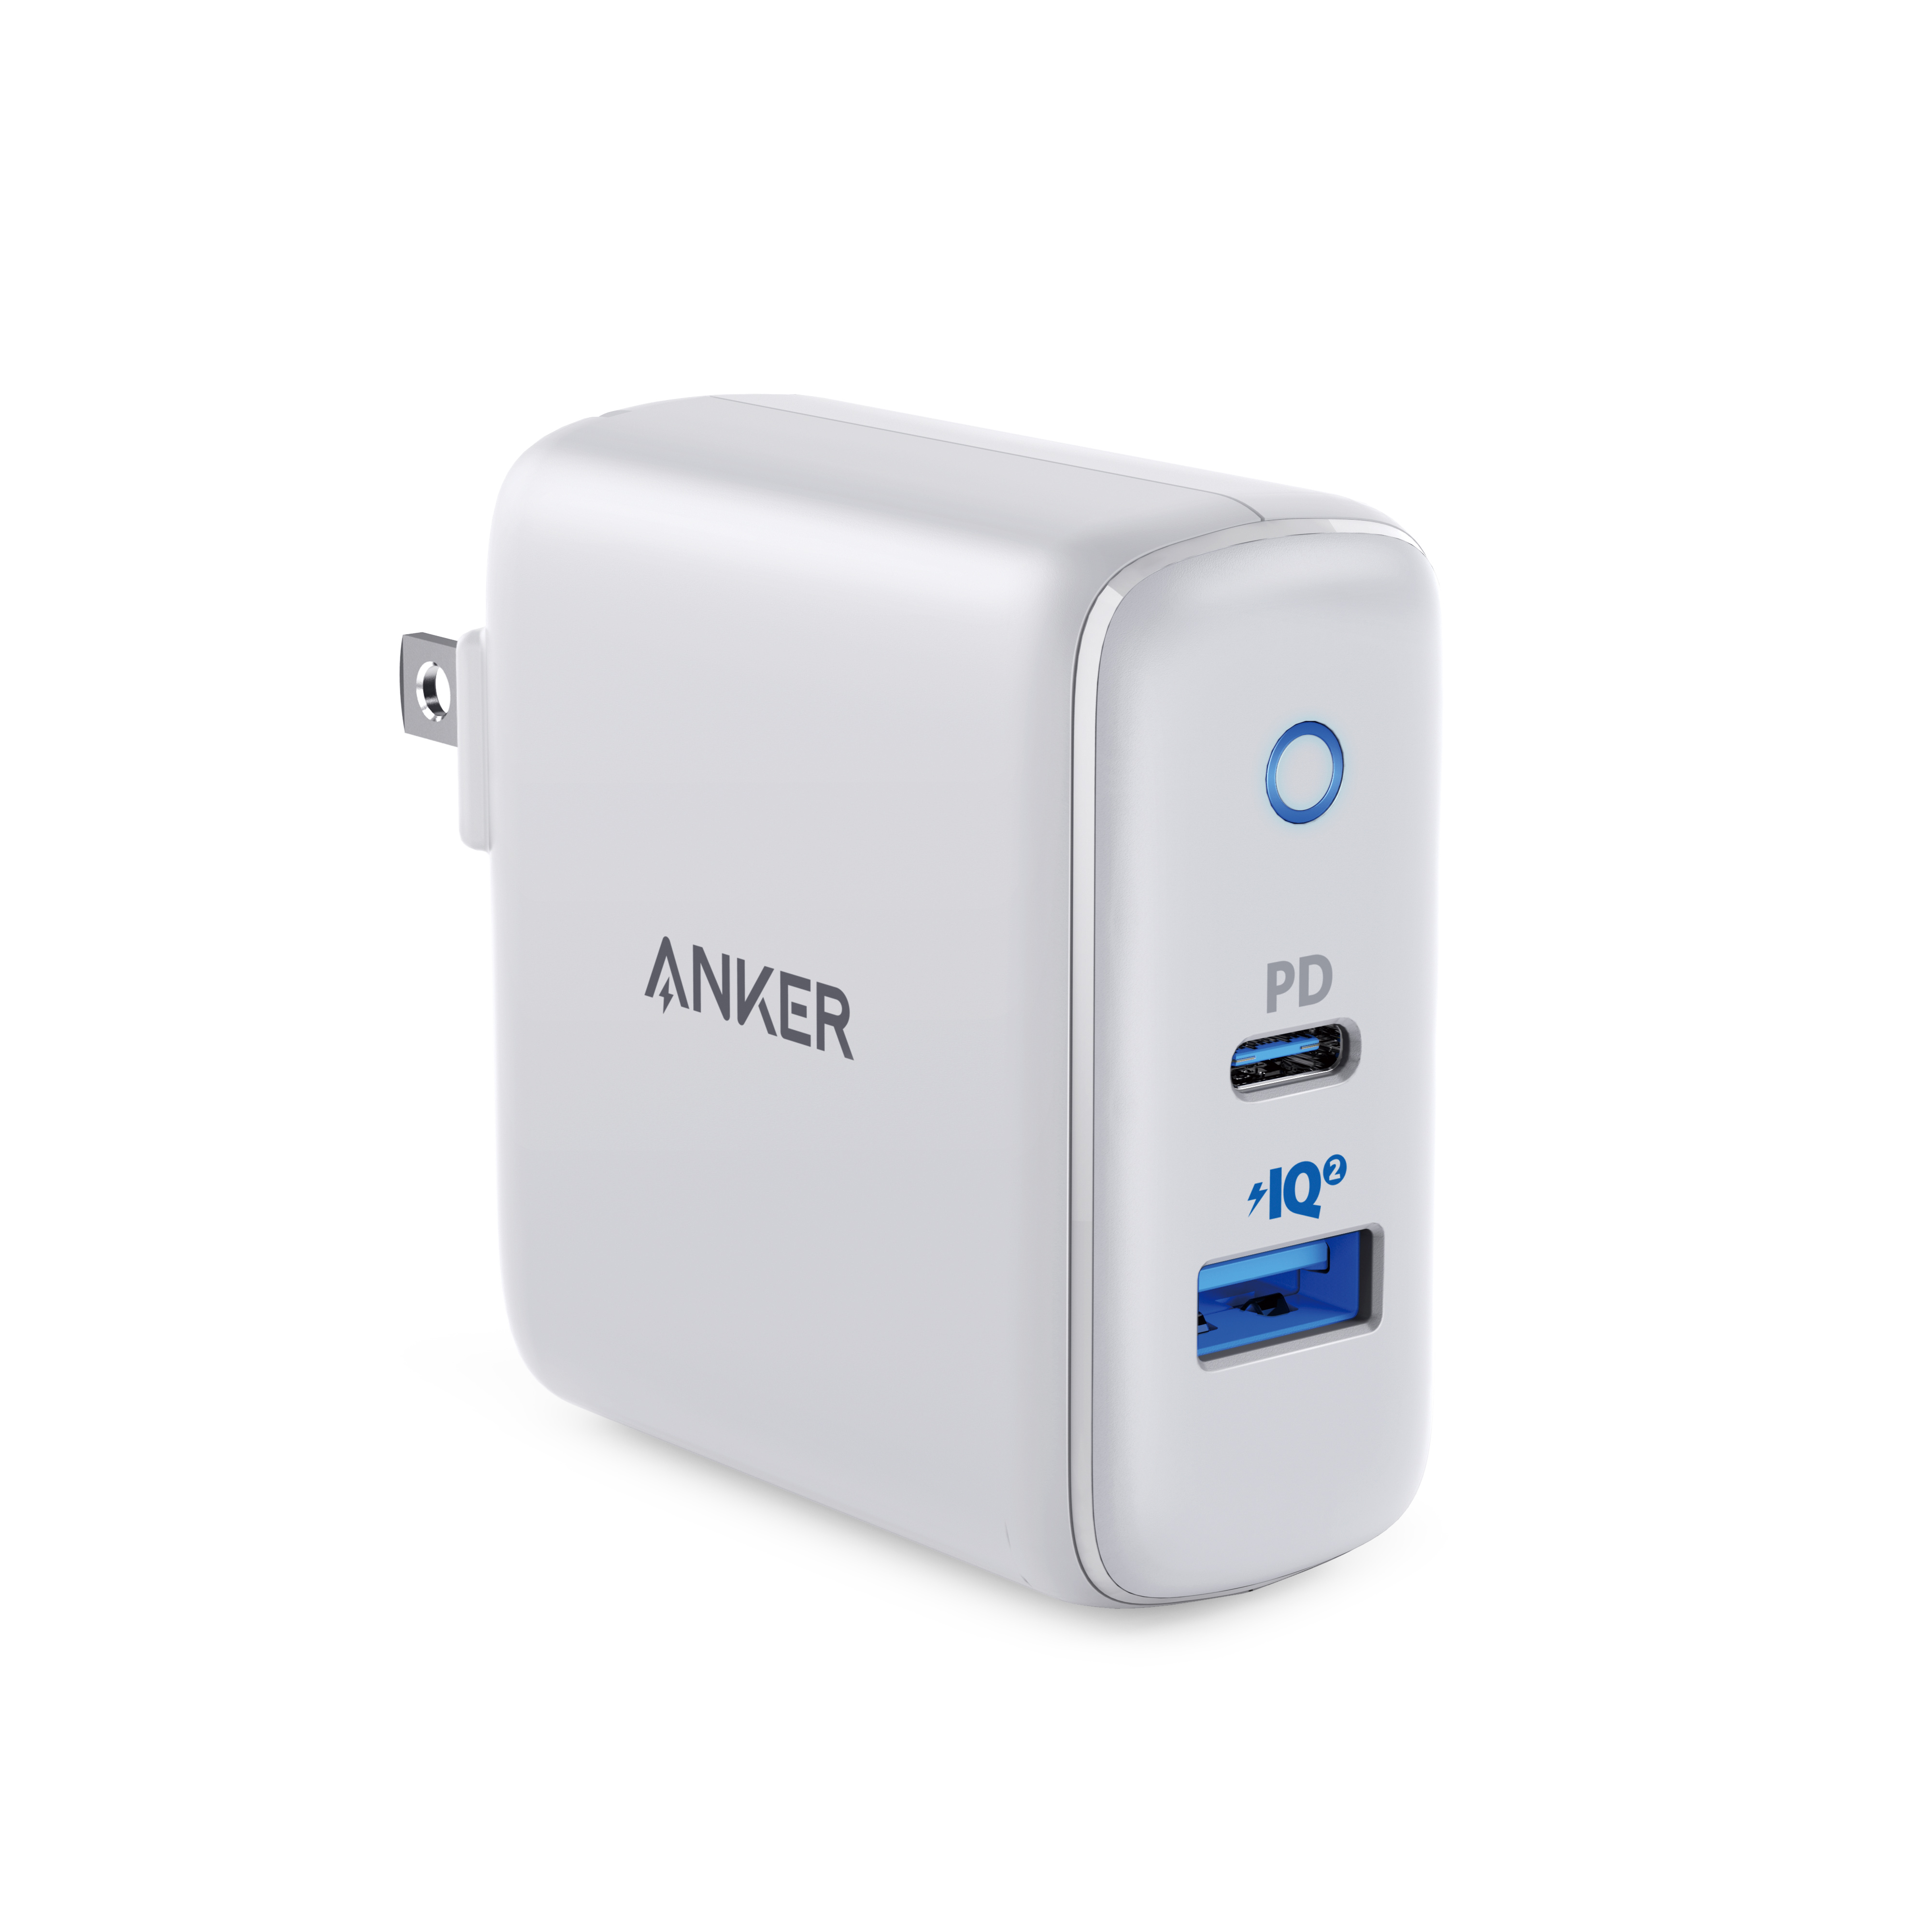 Ymmv Anker 33w Powerport pd+ 2 is on clearance for $5-$10 at walmart in store